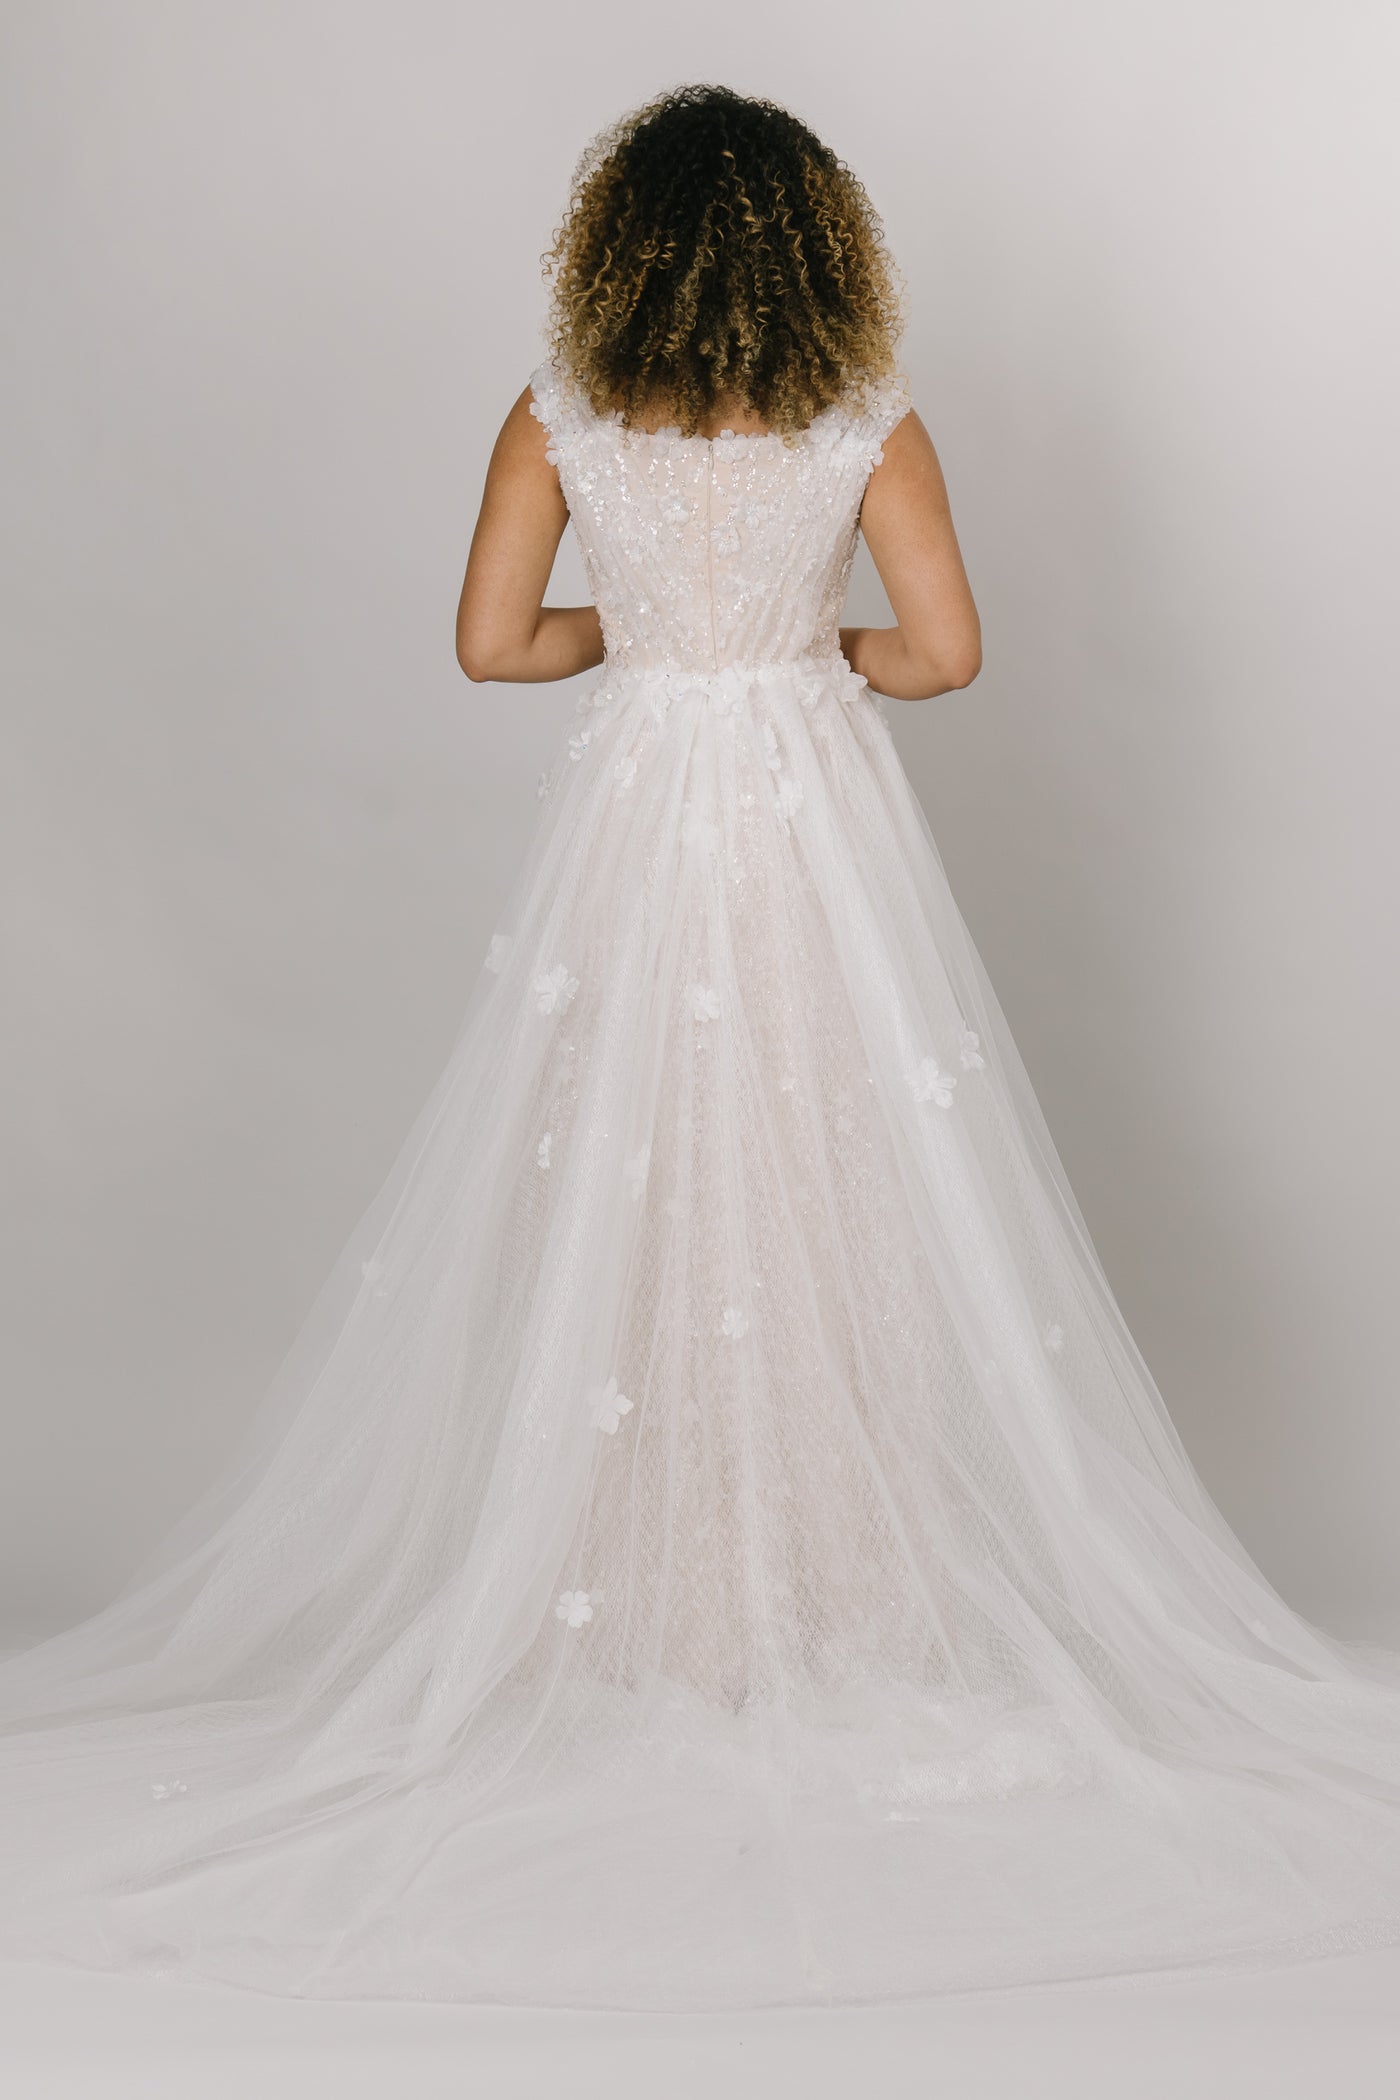 This gown did not miss a detail, featuring sequin detailing, floral and star appliques, and tulle rouching over the bodice., with an overskirt. The view is the back on the modest wedding dress.